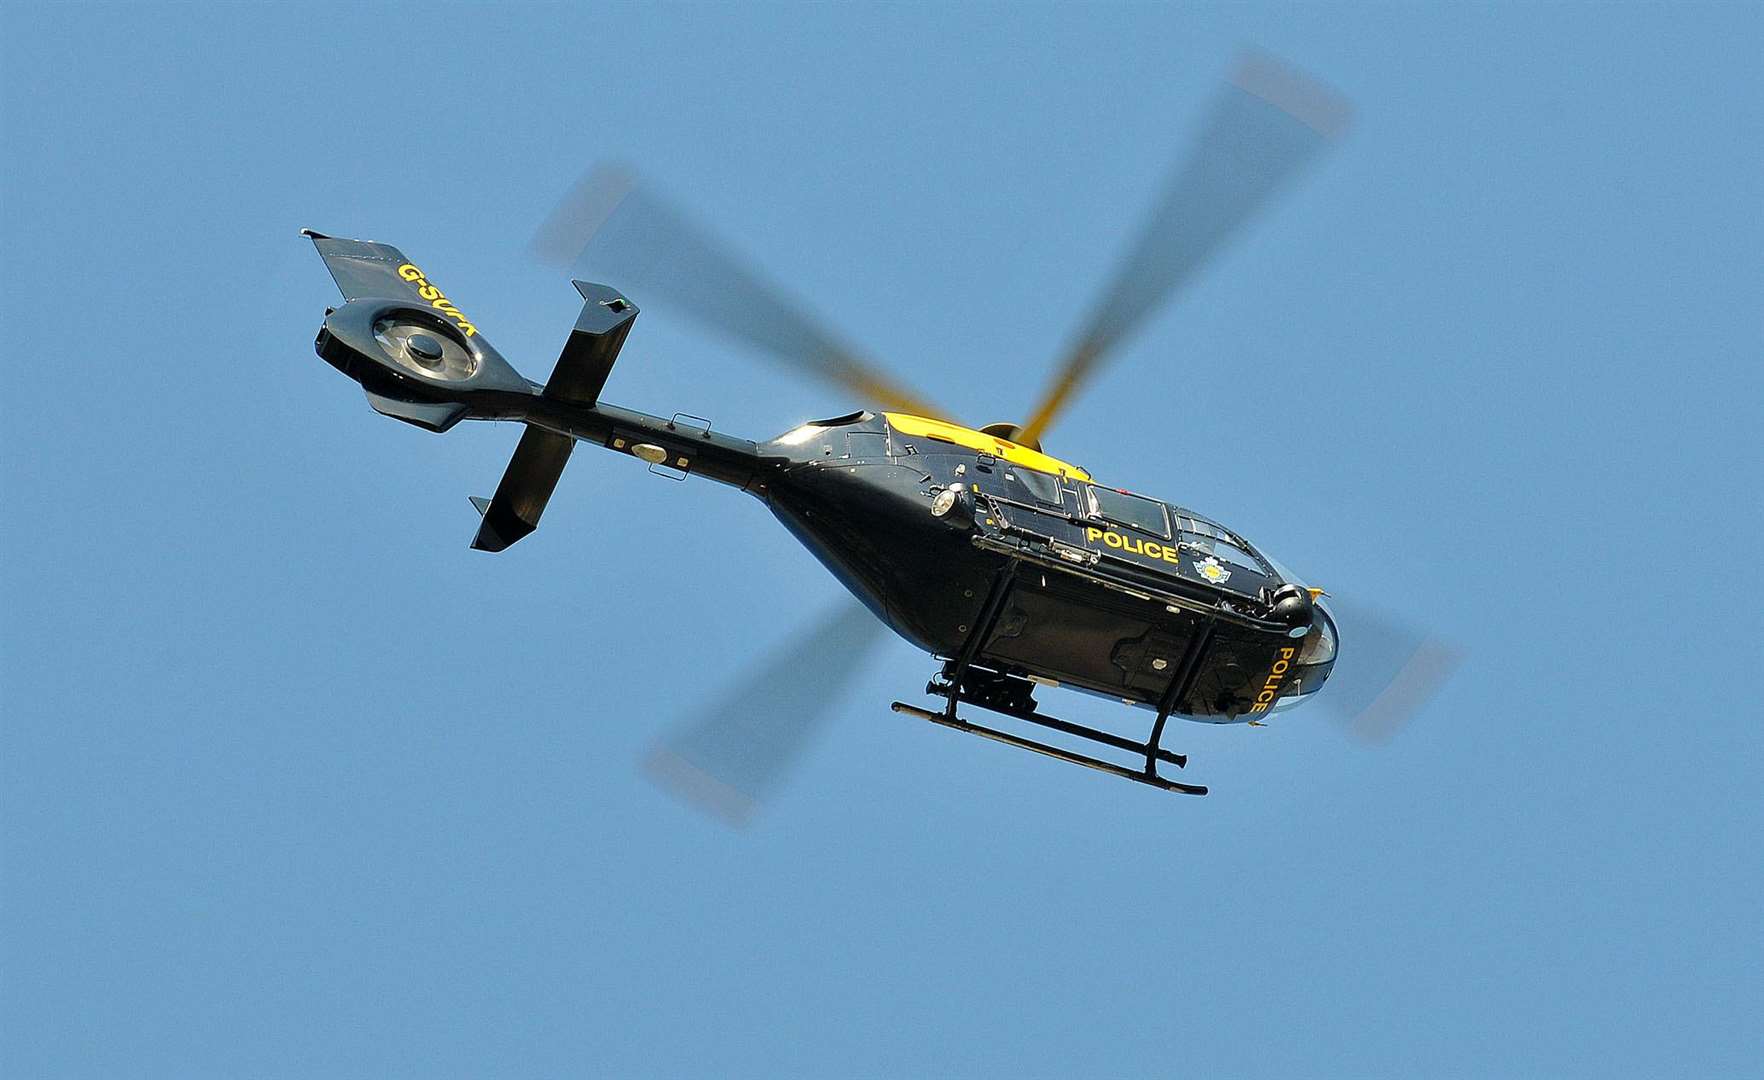 Police Helicopter. (3285368)